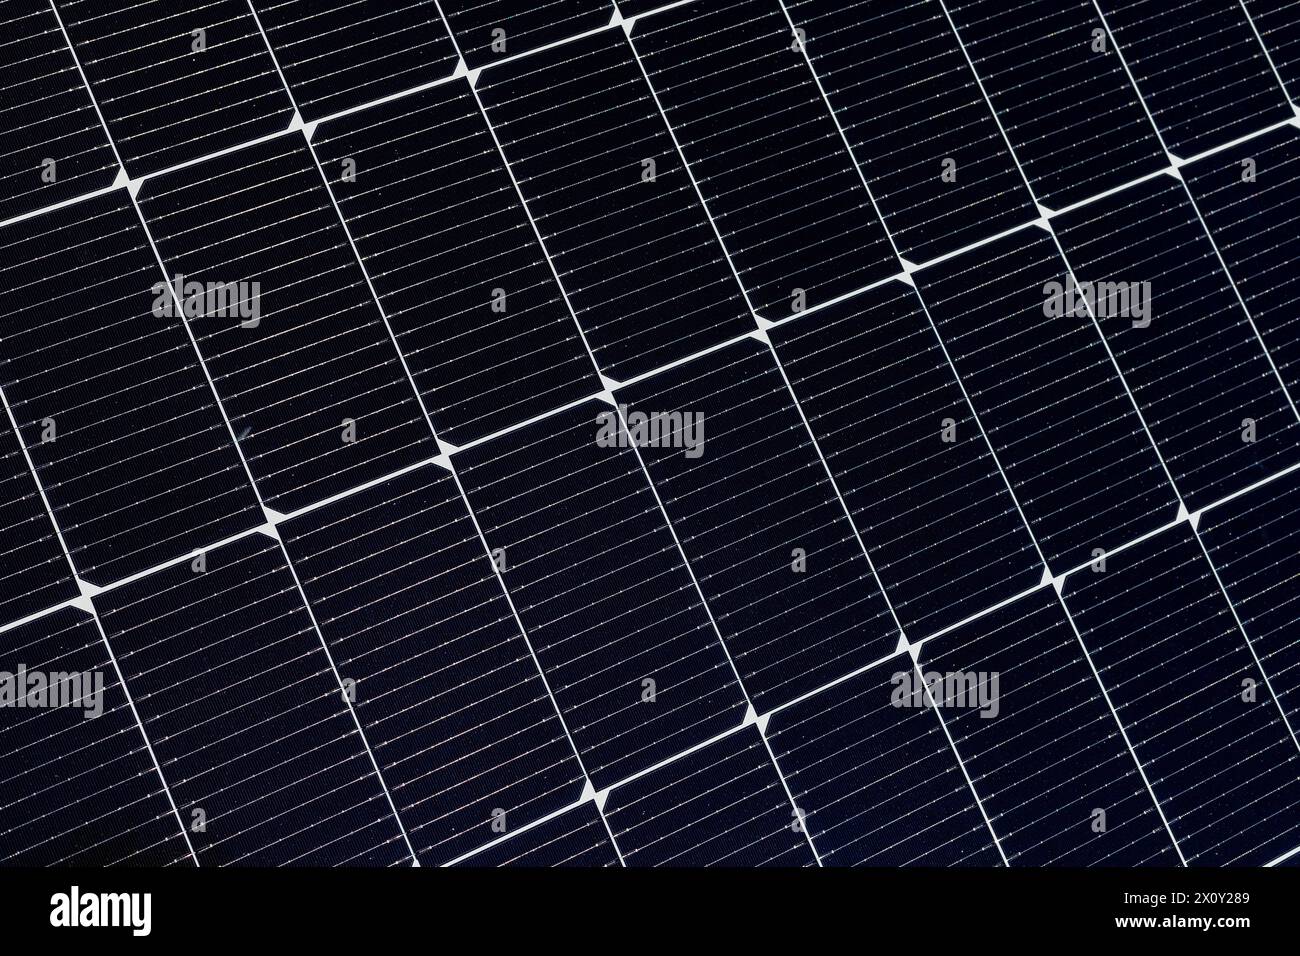 Below view of a solar cells or photovoltaic panels for renewable energy Stock Photo